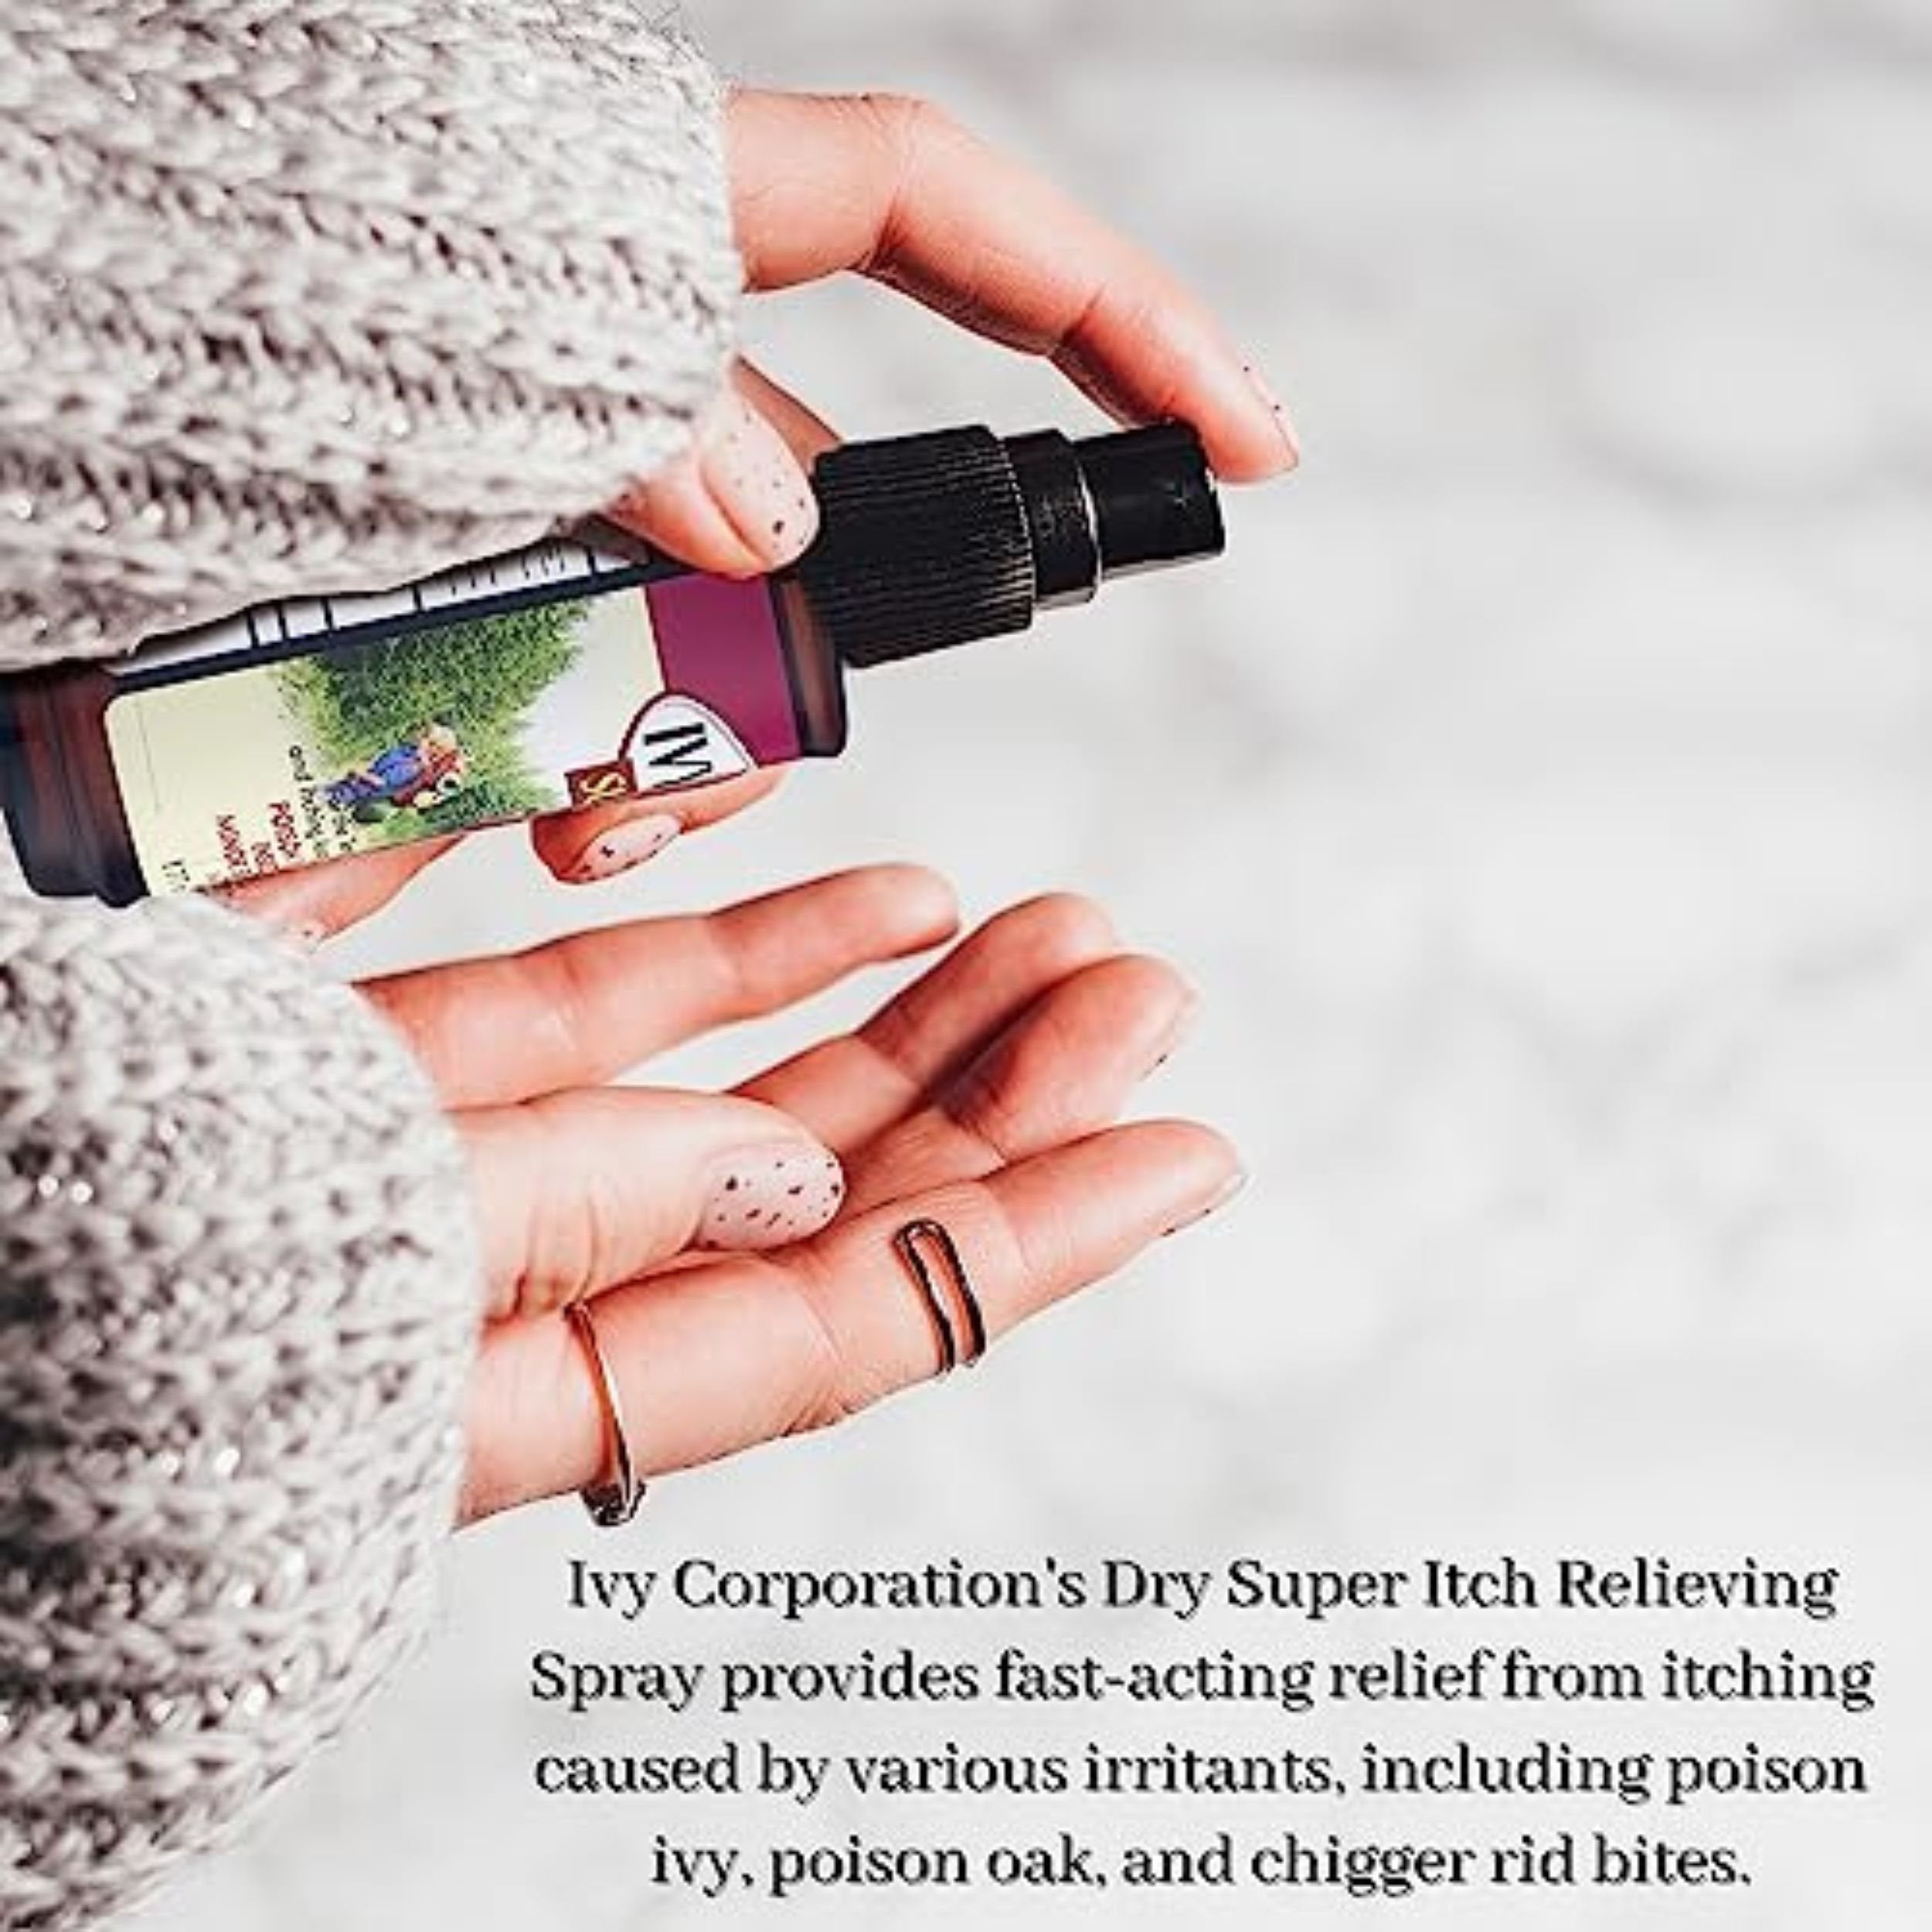 Worldwide Nutrition Ivy Corporation - Dry Super Itch Relieving Spray - Fast-Acting Relief - 6 Fl Oz with Bonus Multi-Purpose Key Chain